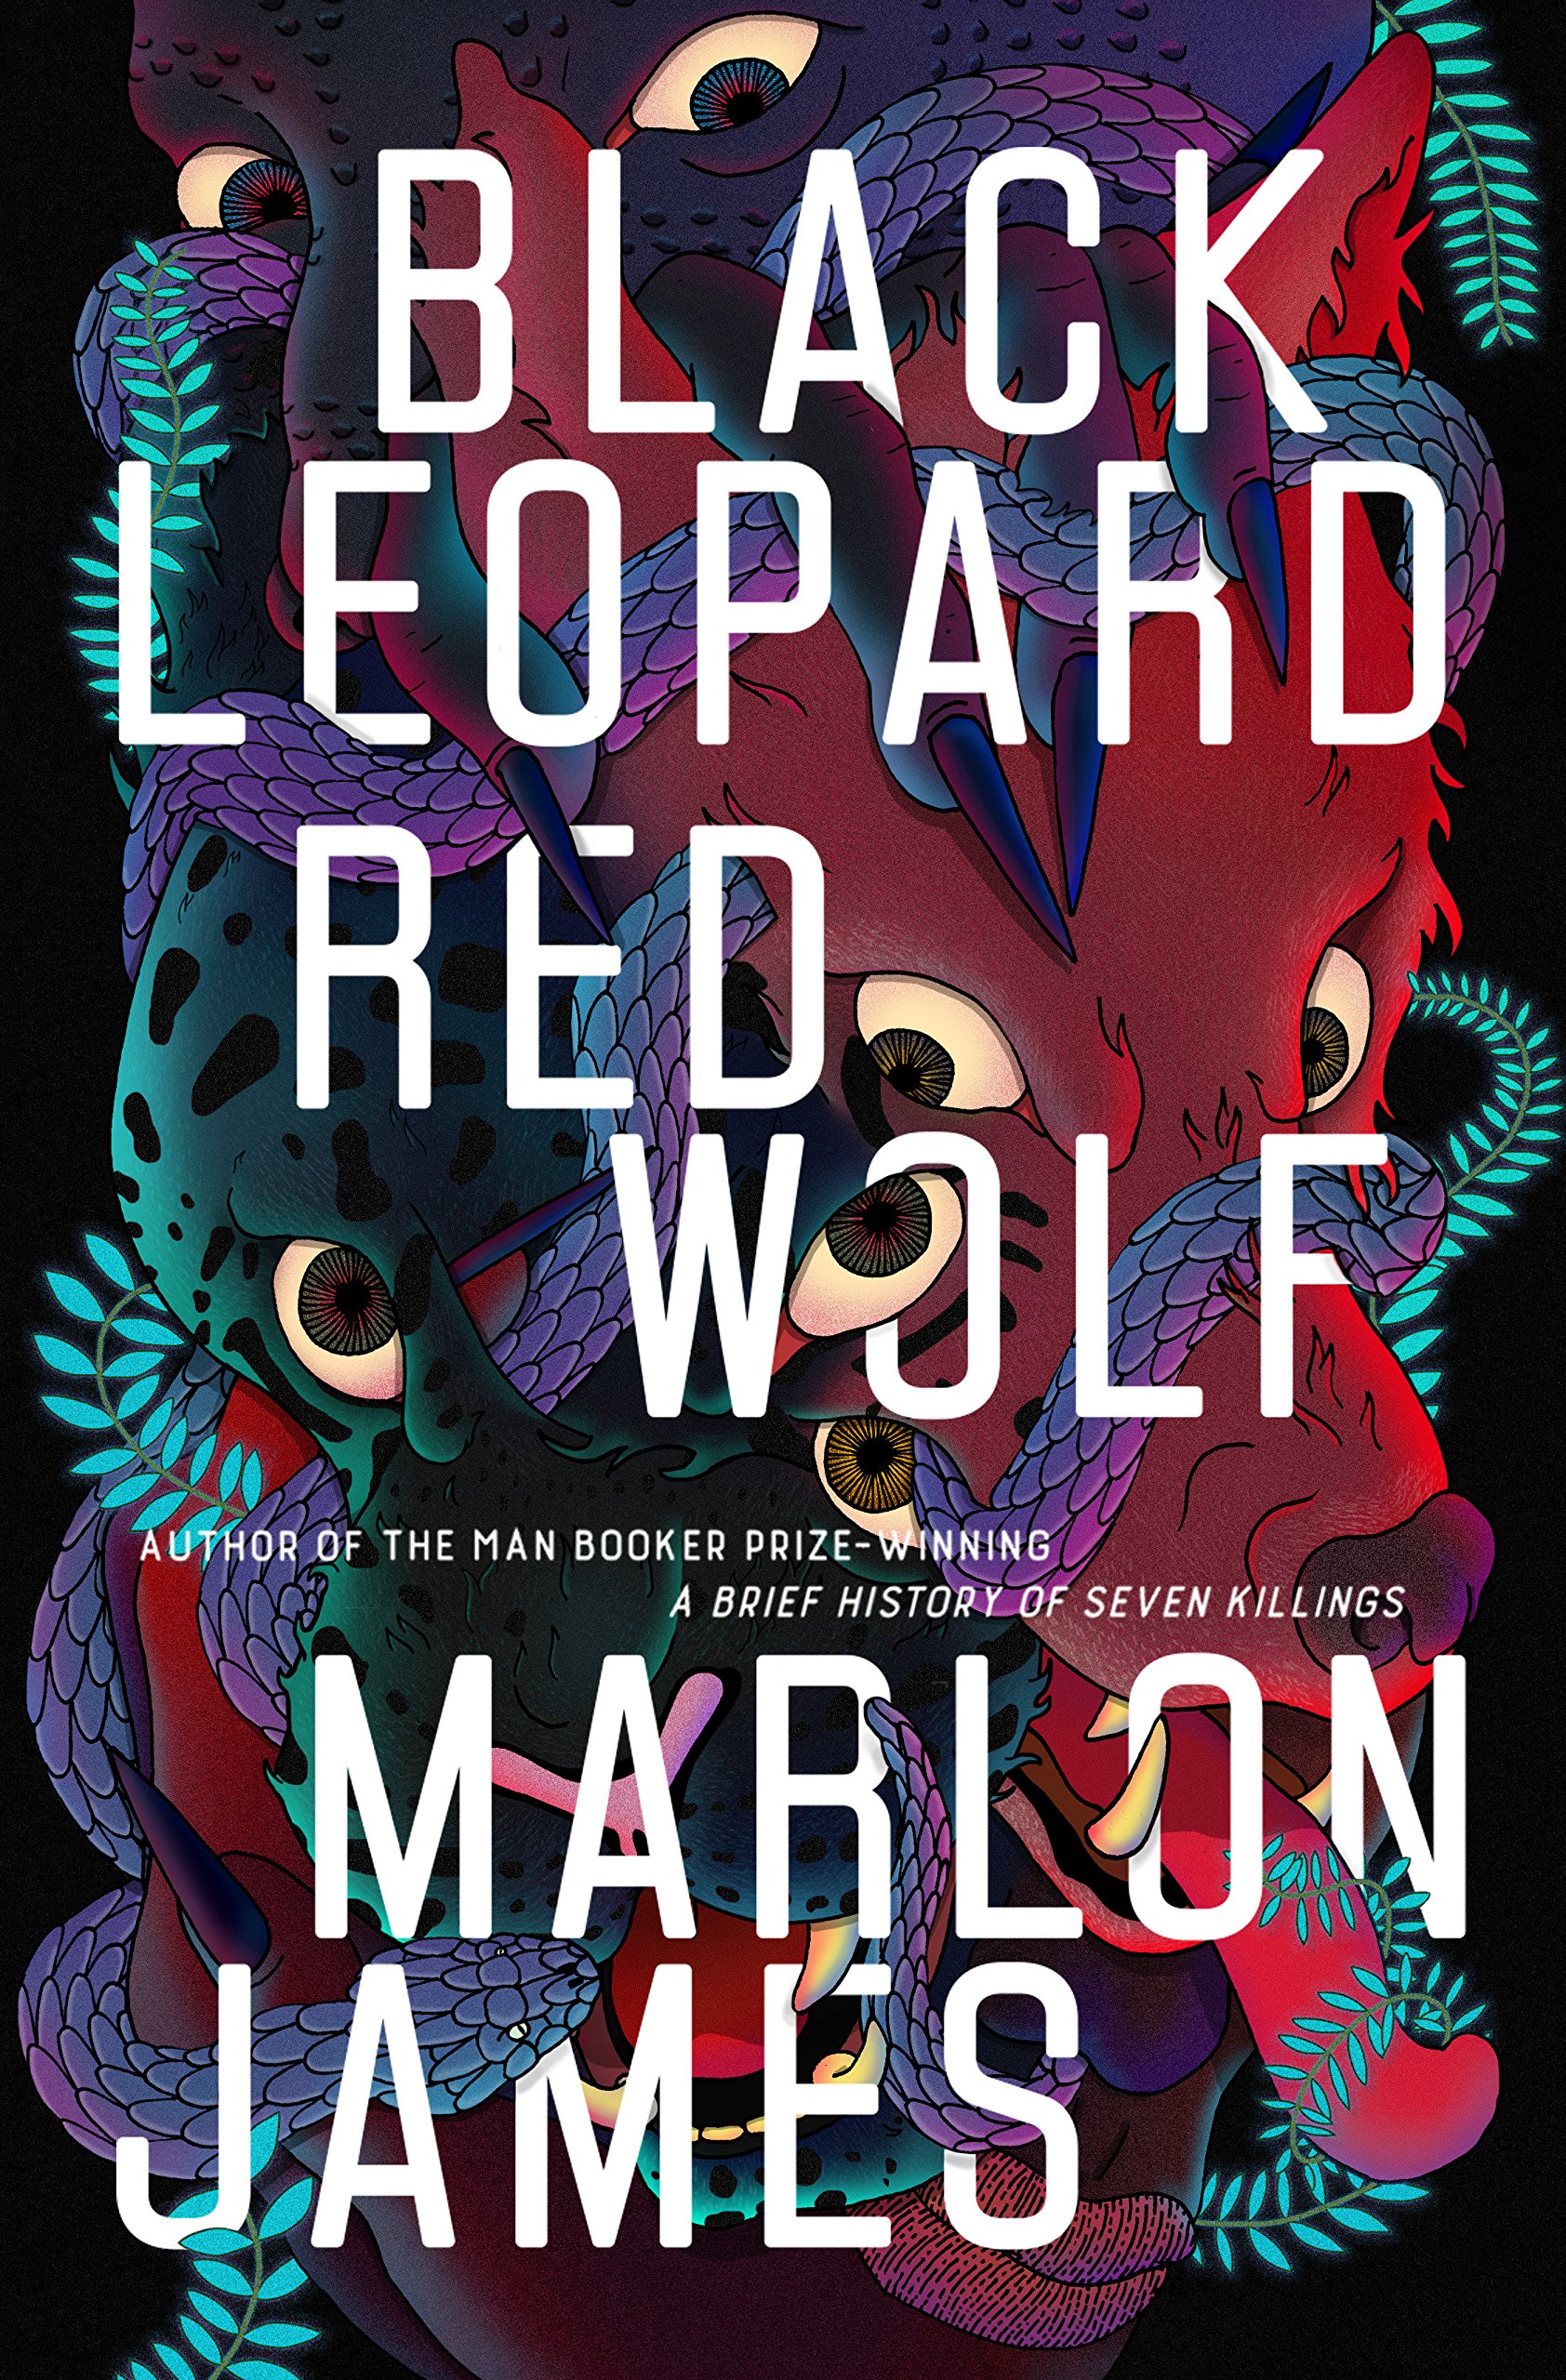 'Black Leopard, Red Wolf' by Marlon James